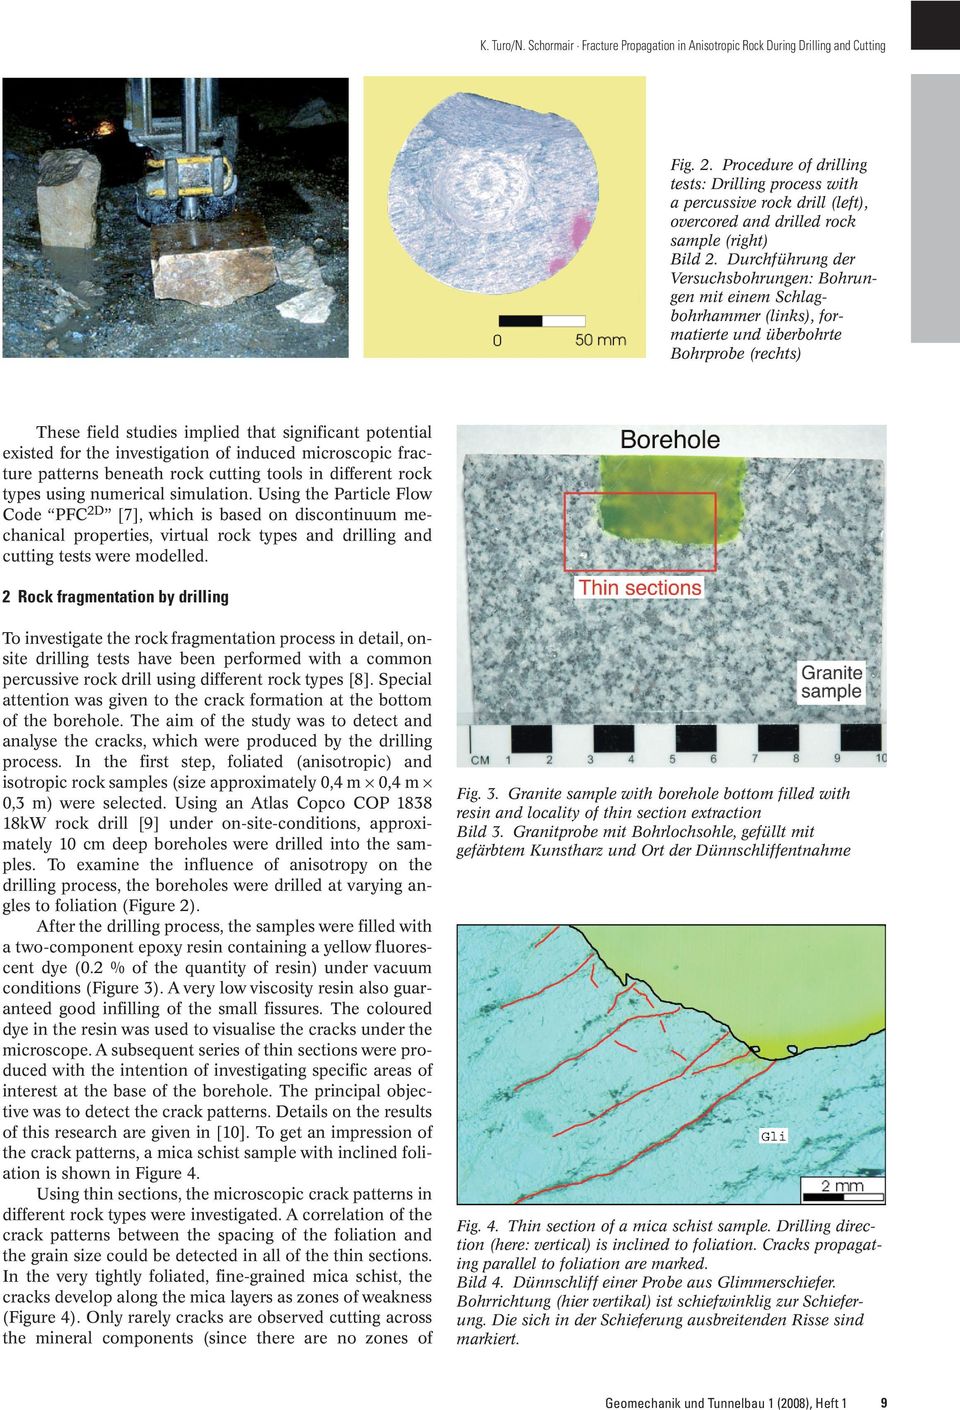 investigation of induced microscopic fracture patterns beneath rock cutting tools in different rock types using numerical simulation.